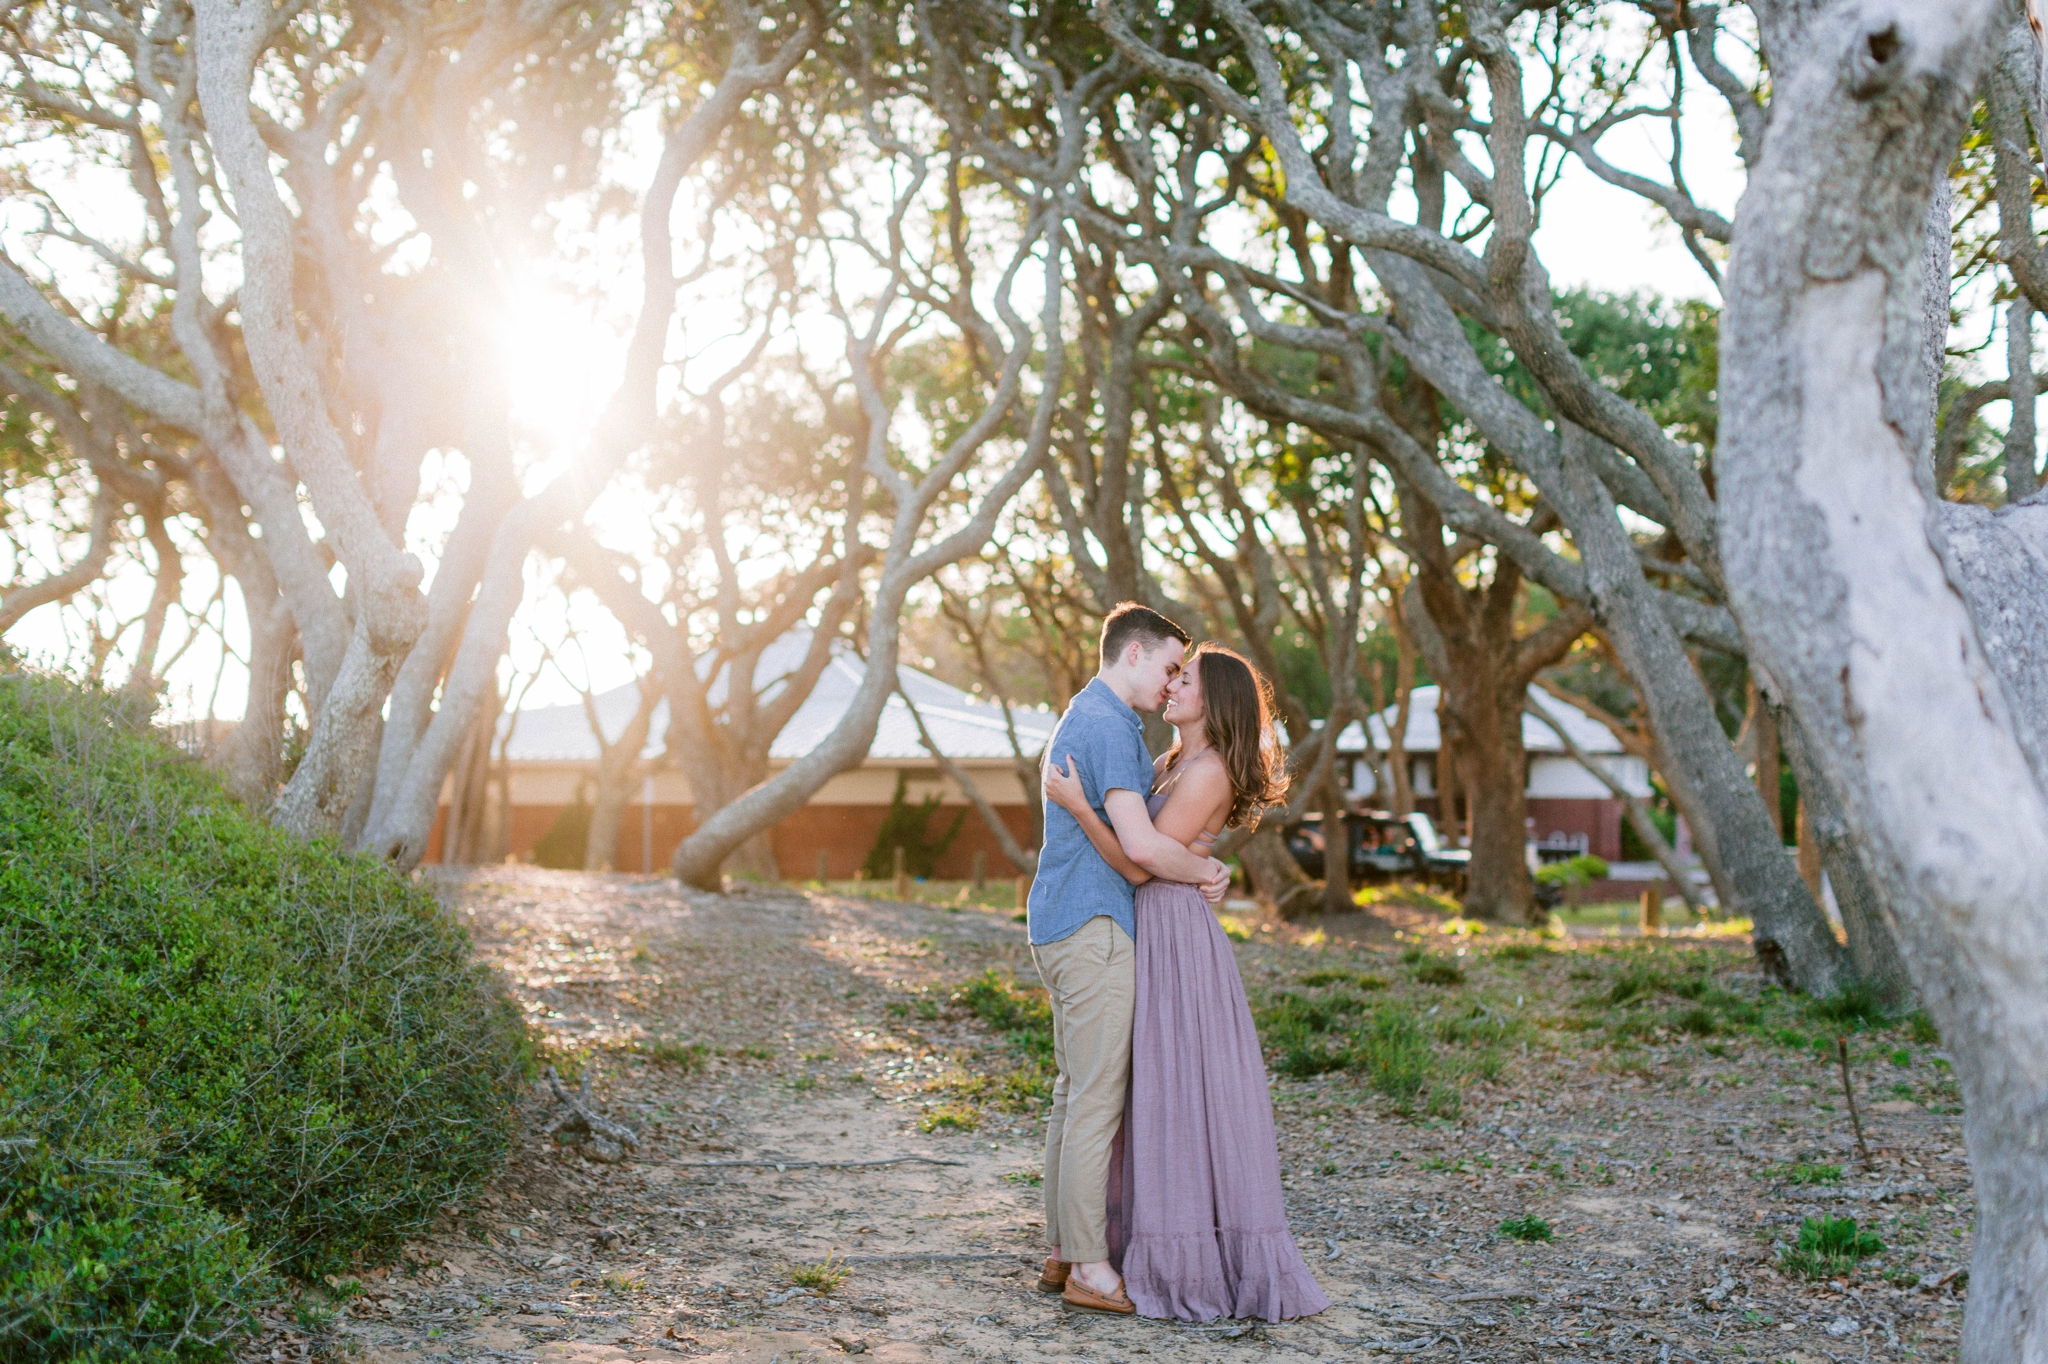  Guy kissing a girl in front of live oak trees with the sunset behind them - Woman is in a flowy pastel maxi dress  - outdoor golden light session - engagement photographer in honolulu, oahu, hawaii - johanna dye photography 